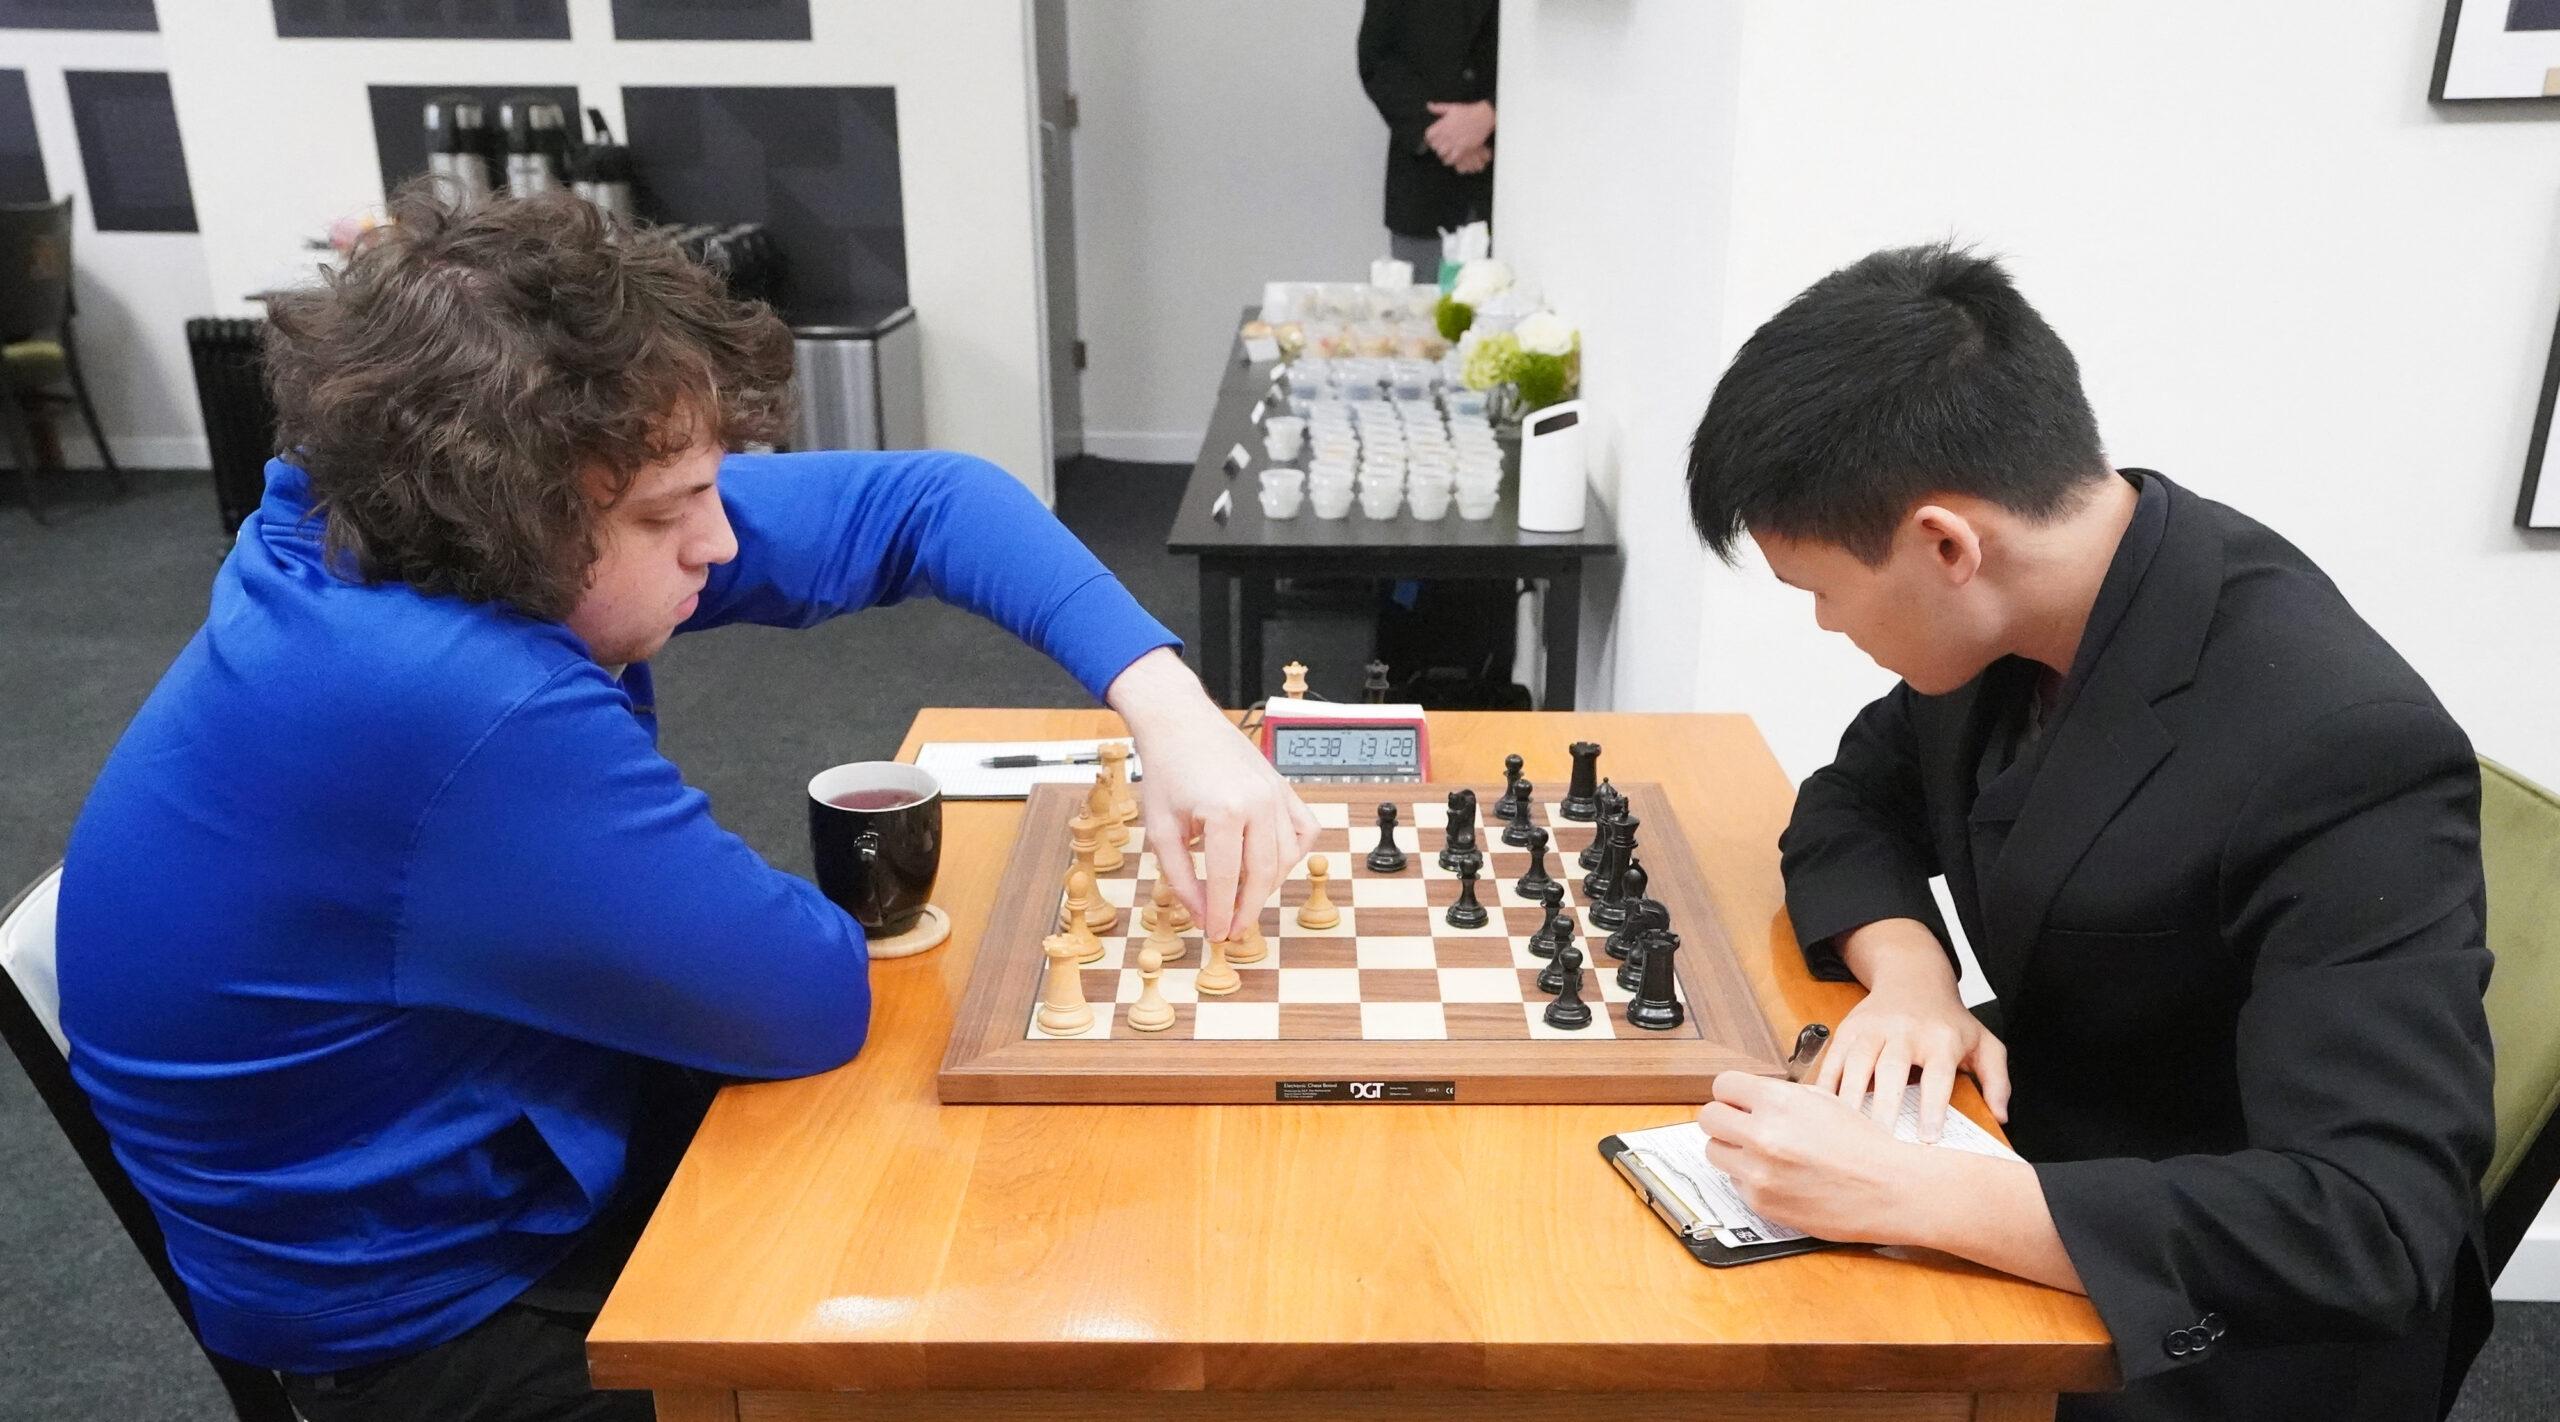 Chess Grandmaster Hans Niemann (L) makes a move while playing Chess Grandmaster Awonder Liang in Round 13 of the U.S. Championship 2022